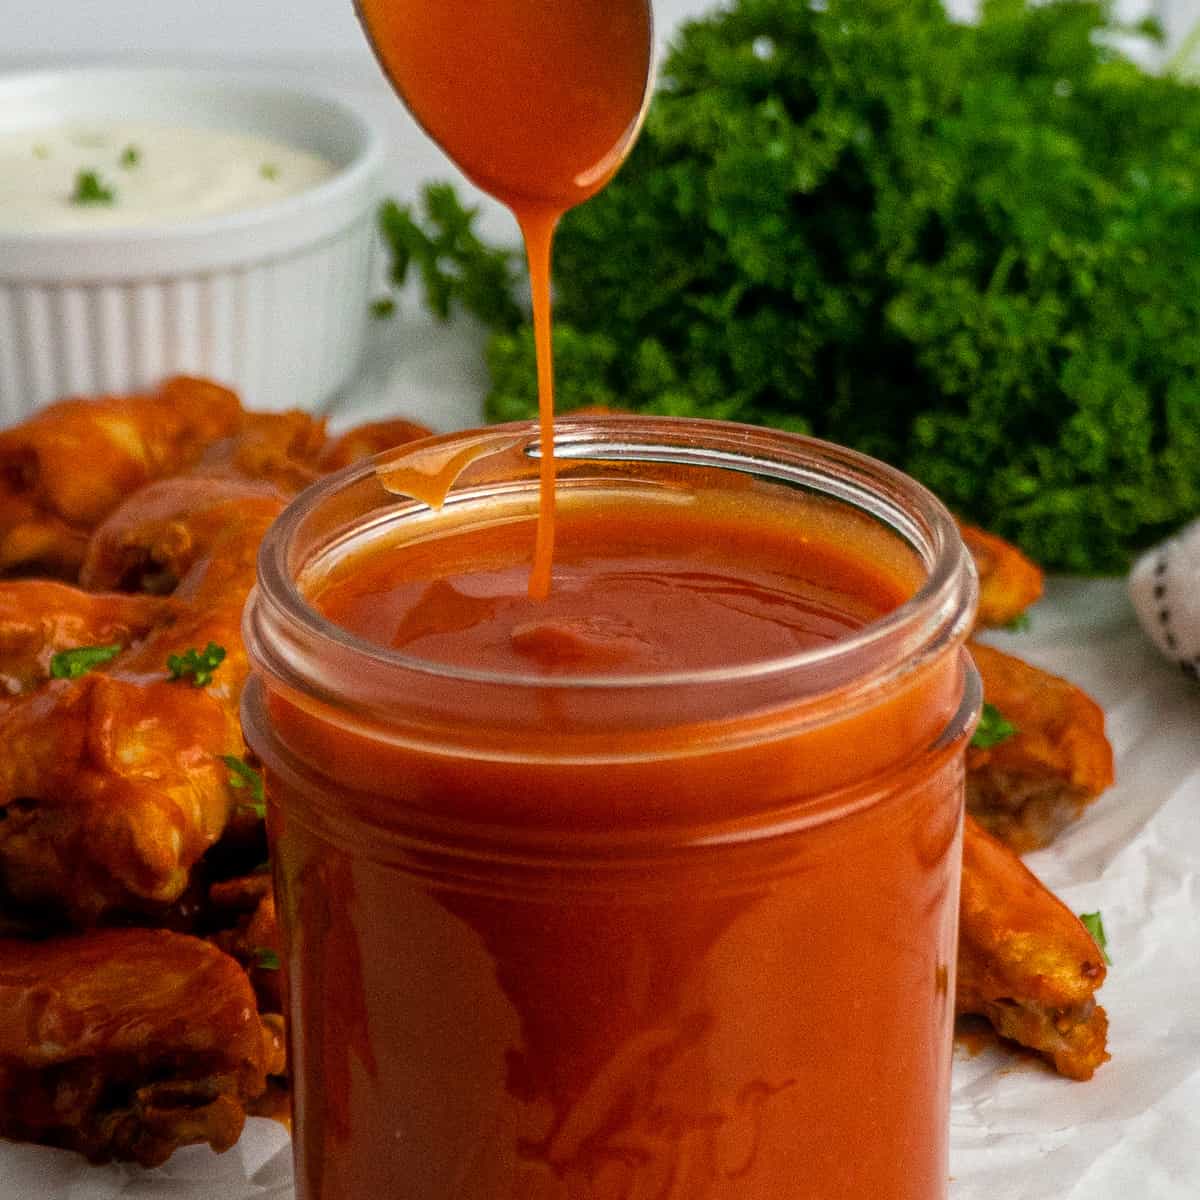 A spoon being dipped into homemade buffalo sauce.